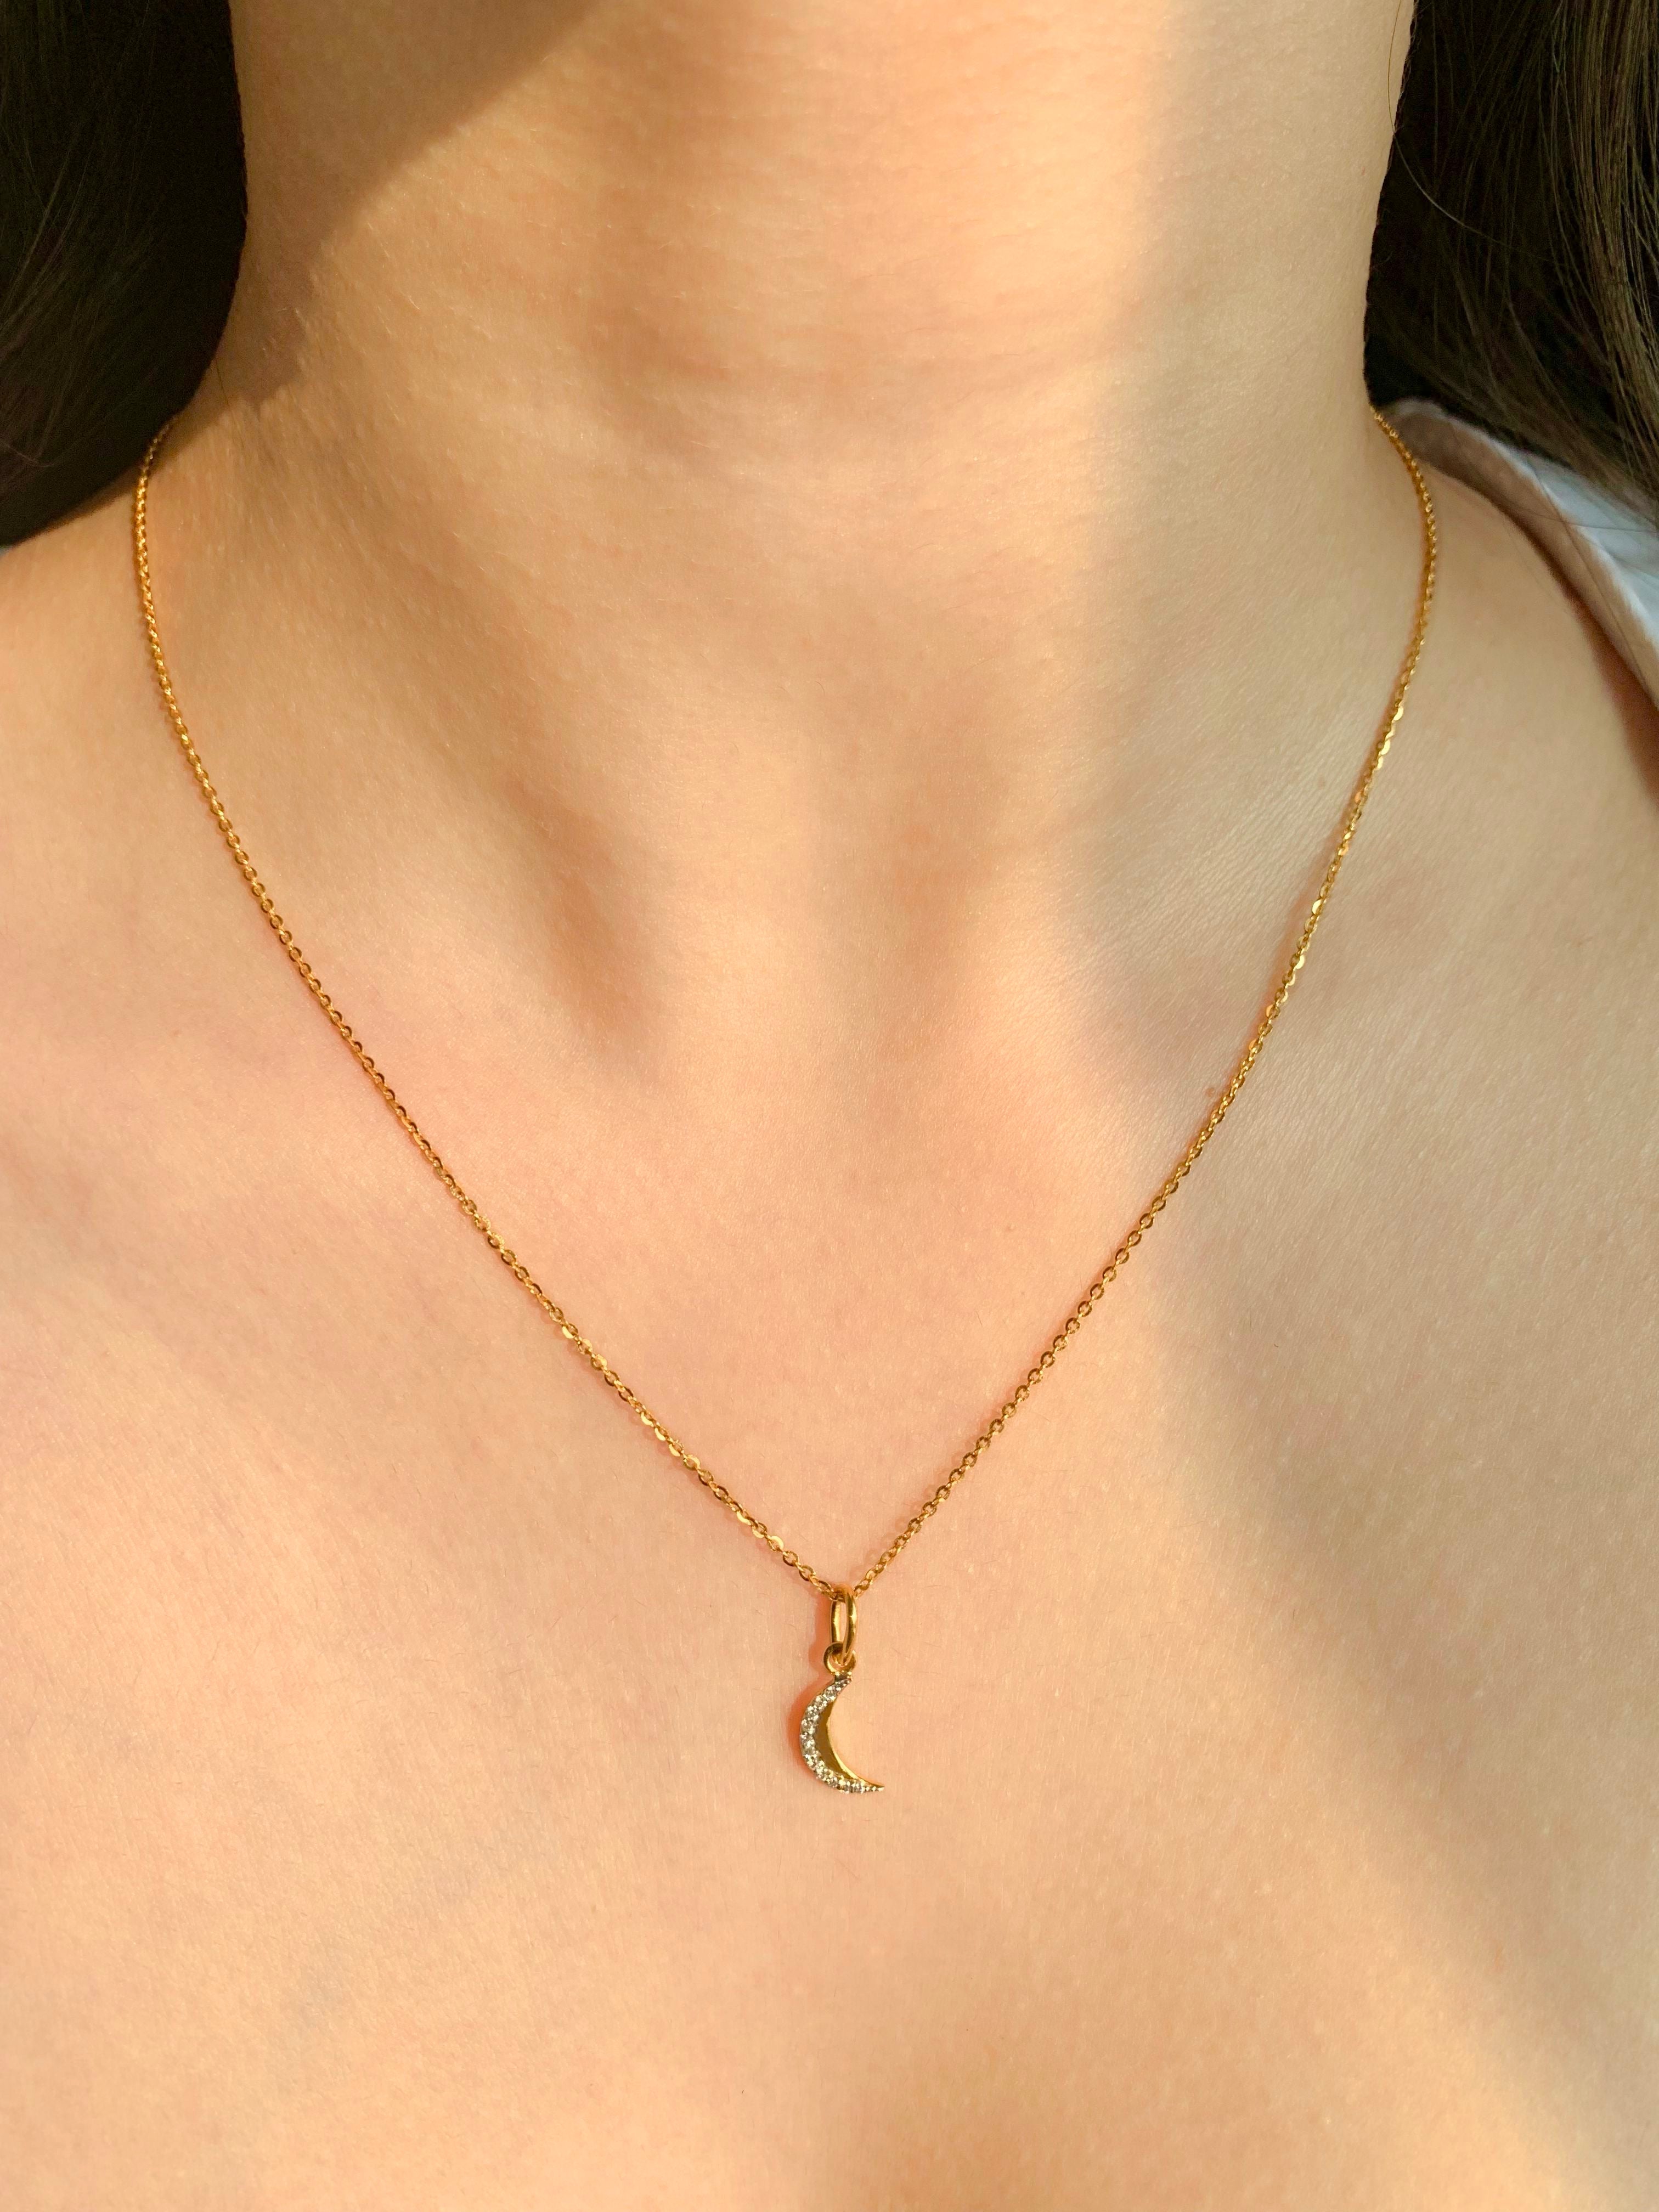 Gold moon face necklace,gold face necklace,round necklace,coin  necklace,full moon necklace,moon face necklace moon phase necklace